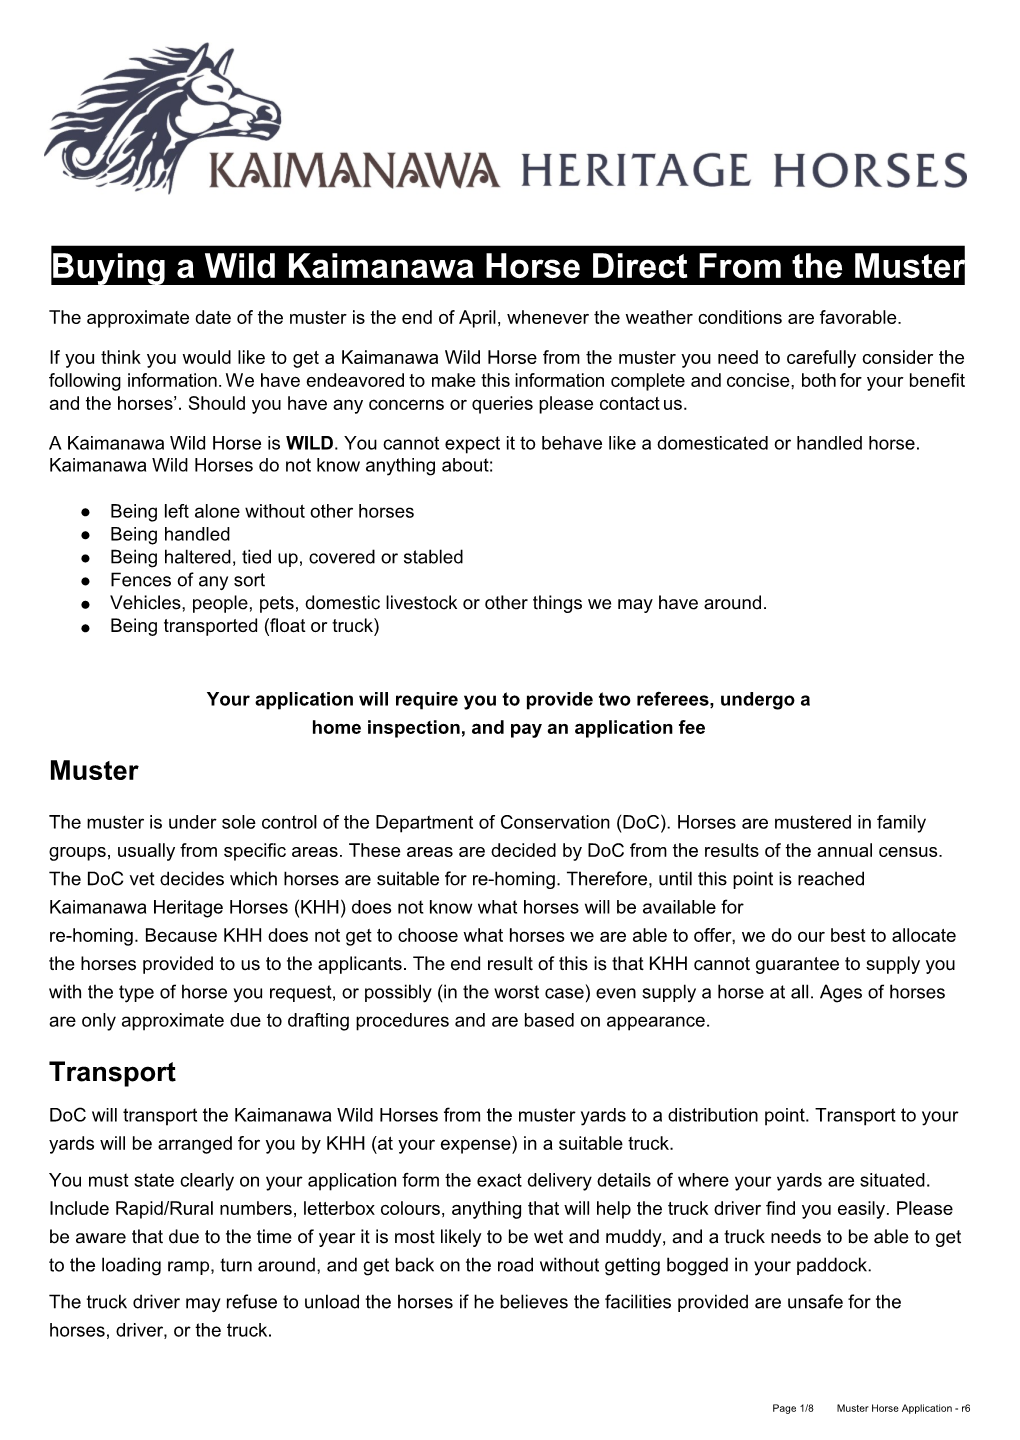 Buying a Wild Kaimanawa Horse Direct from the Muster